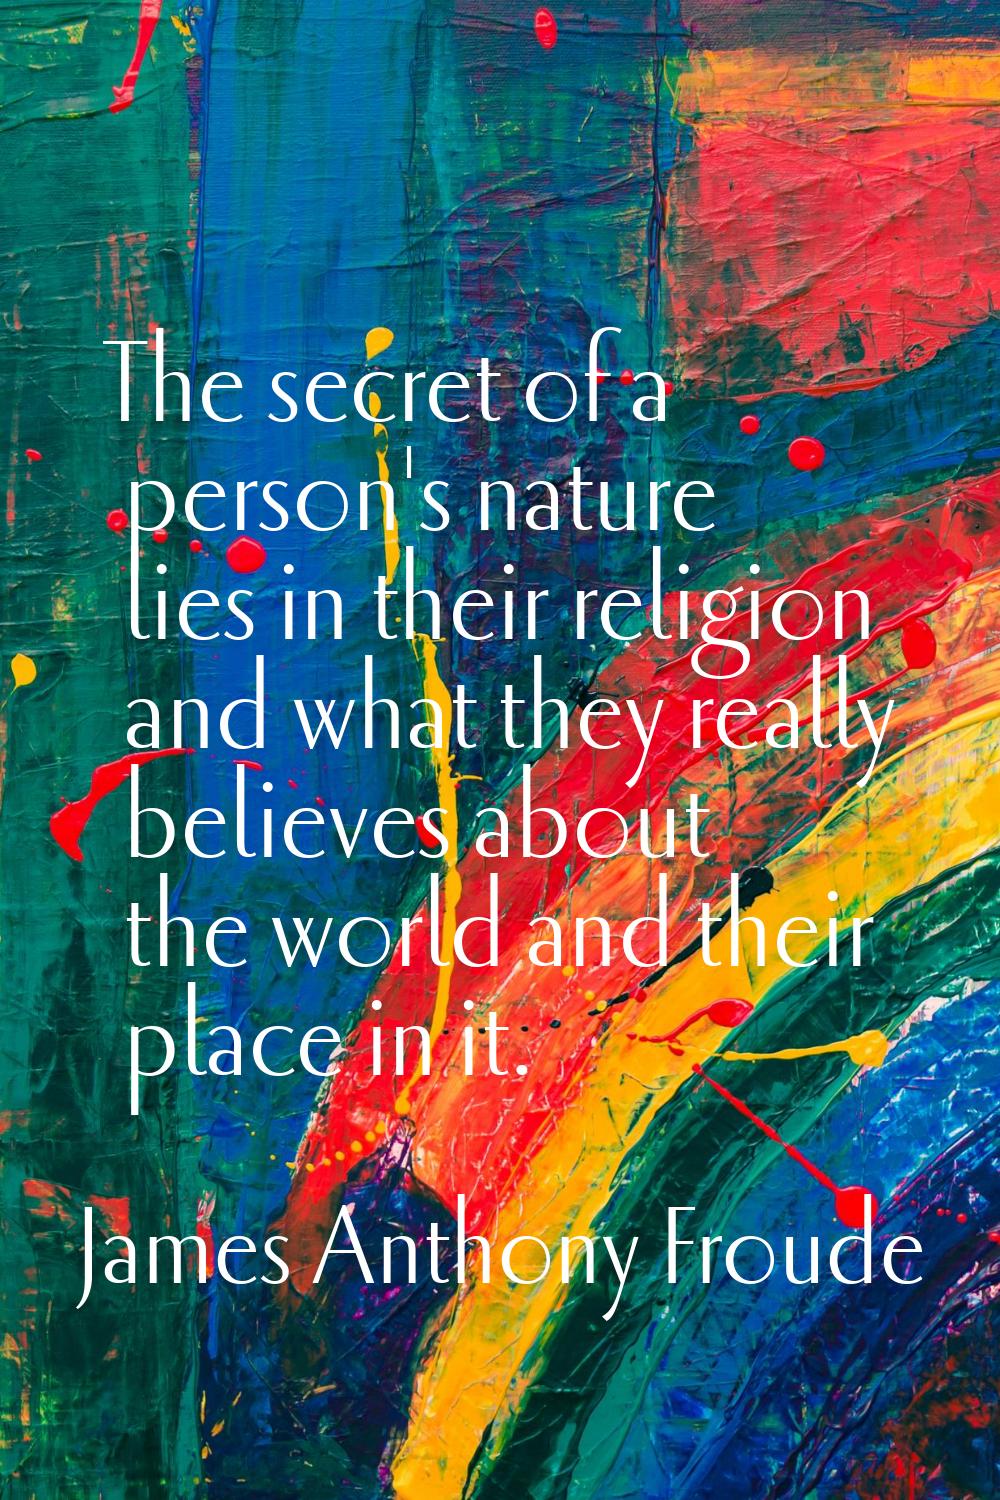 The secret of a person's nature lies in their religion and what they really believes about the worl